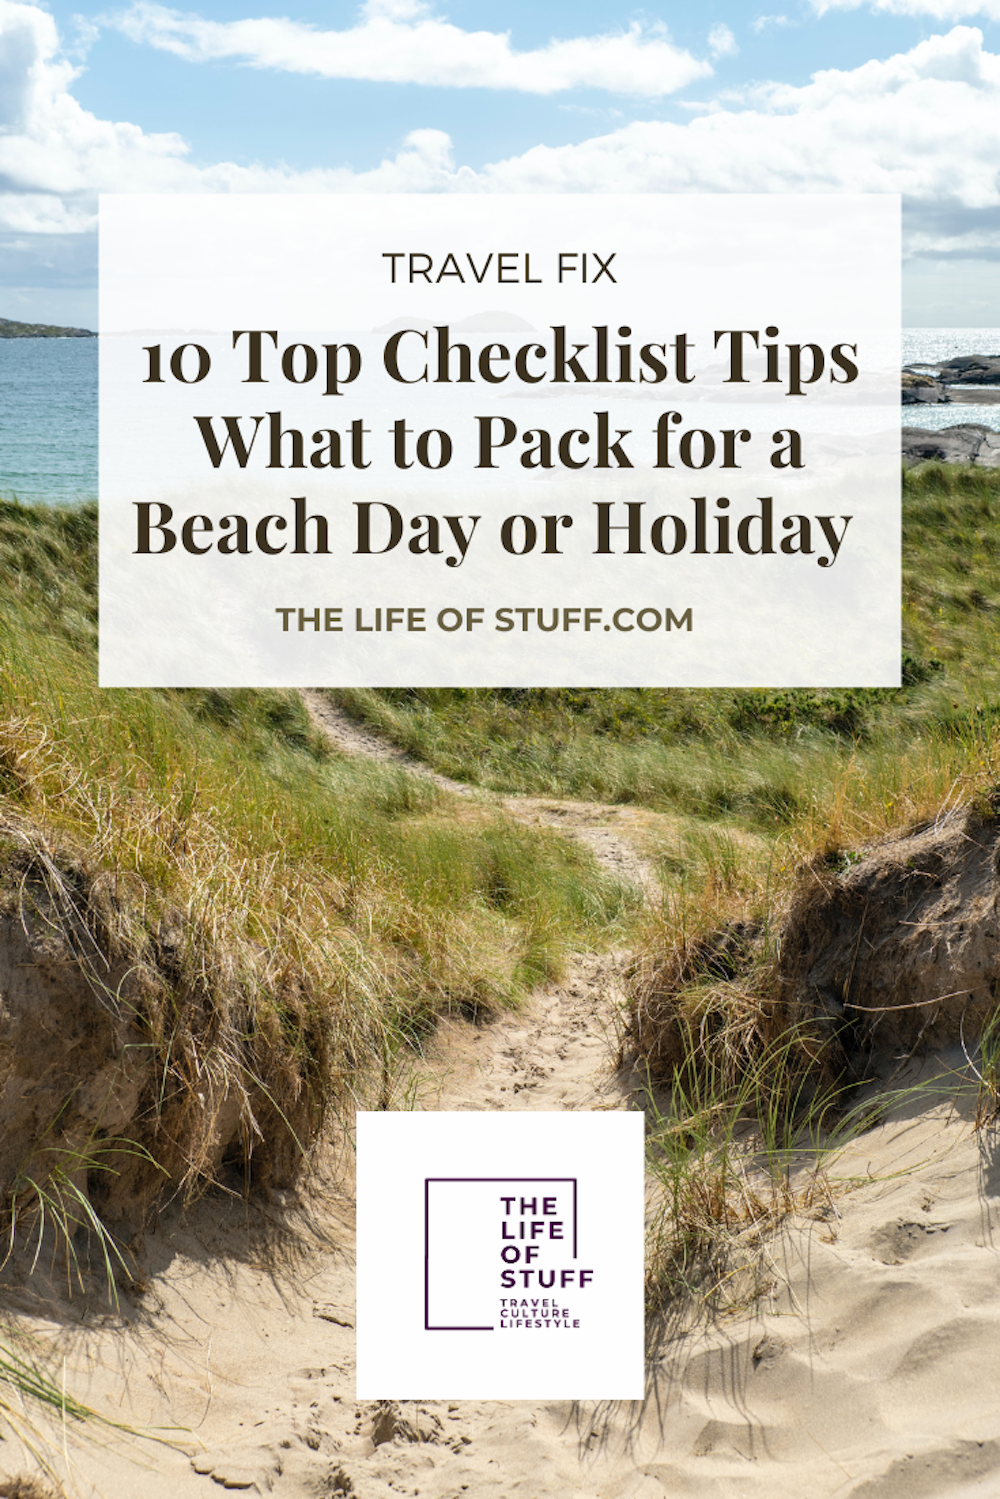 10 Top Checklist Tips - What to Pack for a Beach Day - The Life of Stuff